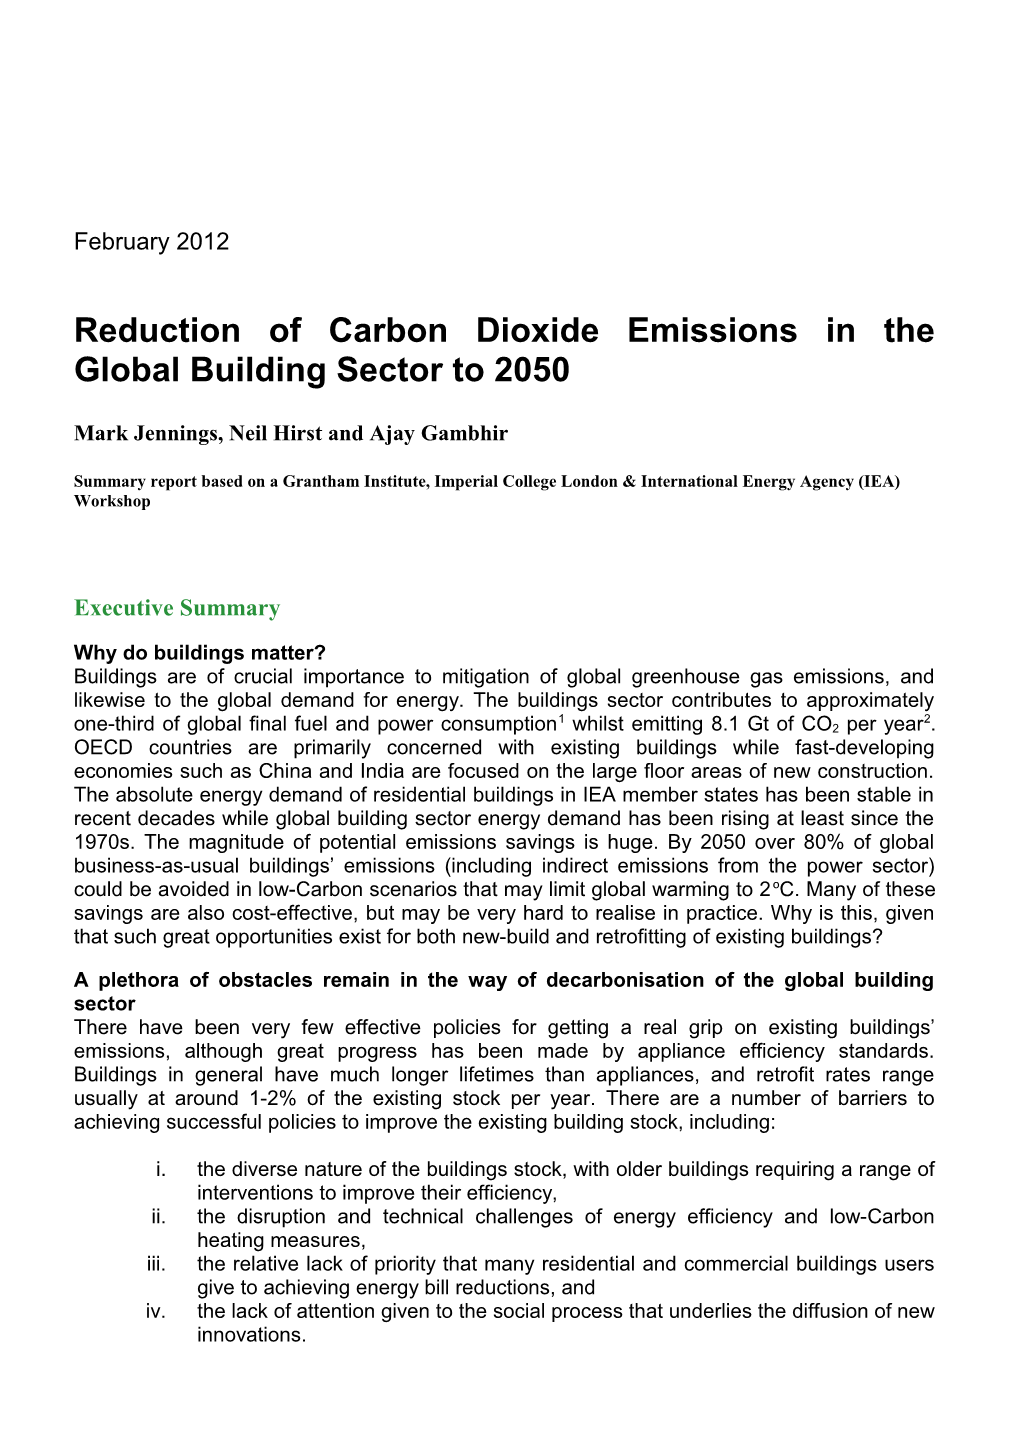 In the Global Building Sector to 2050